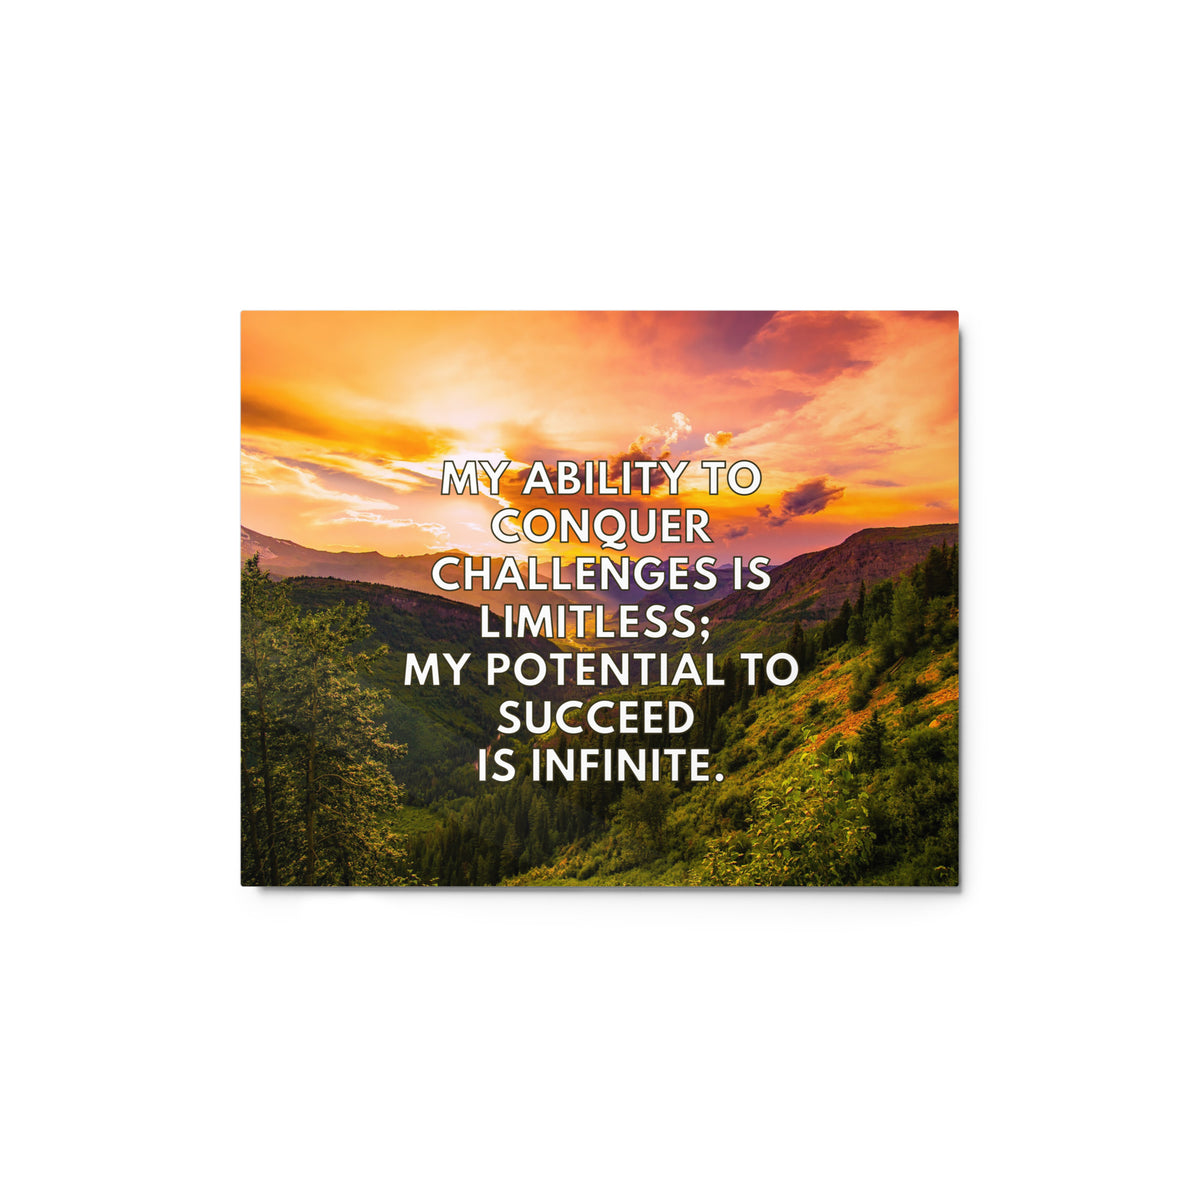 My Ability To Conquer Challenges Is Limitless; My Potential To Succeed Is Infinite. | Glossy Metal Print  Success Acceleration Tools